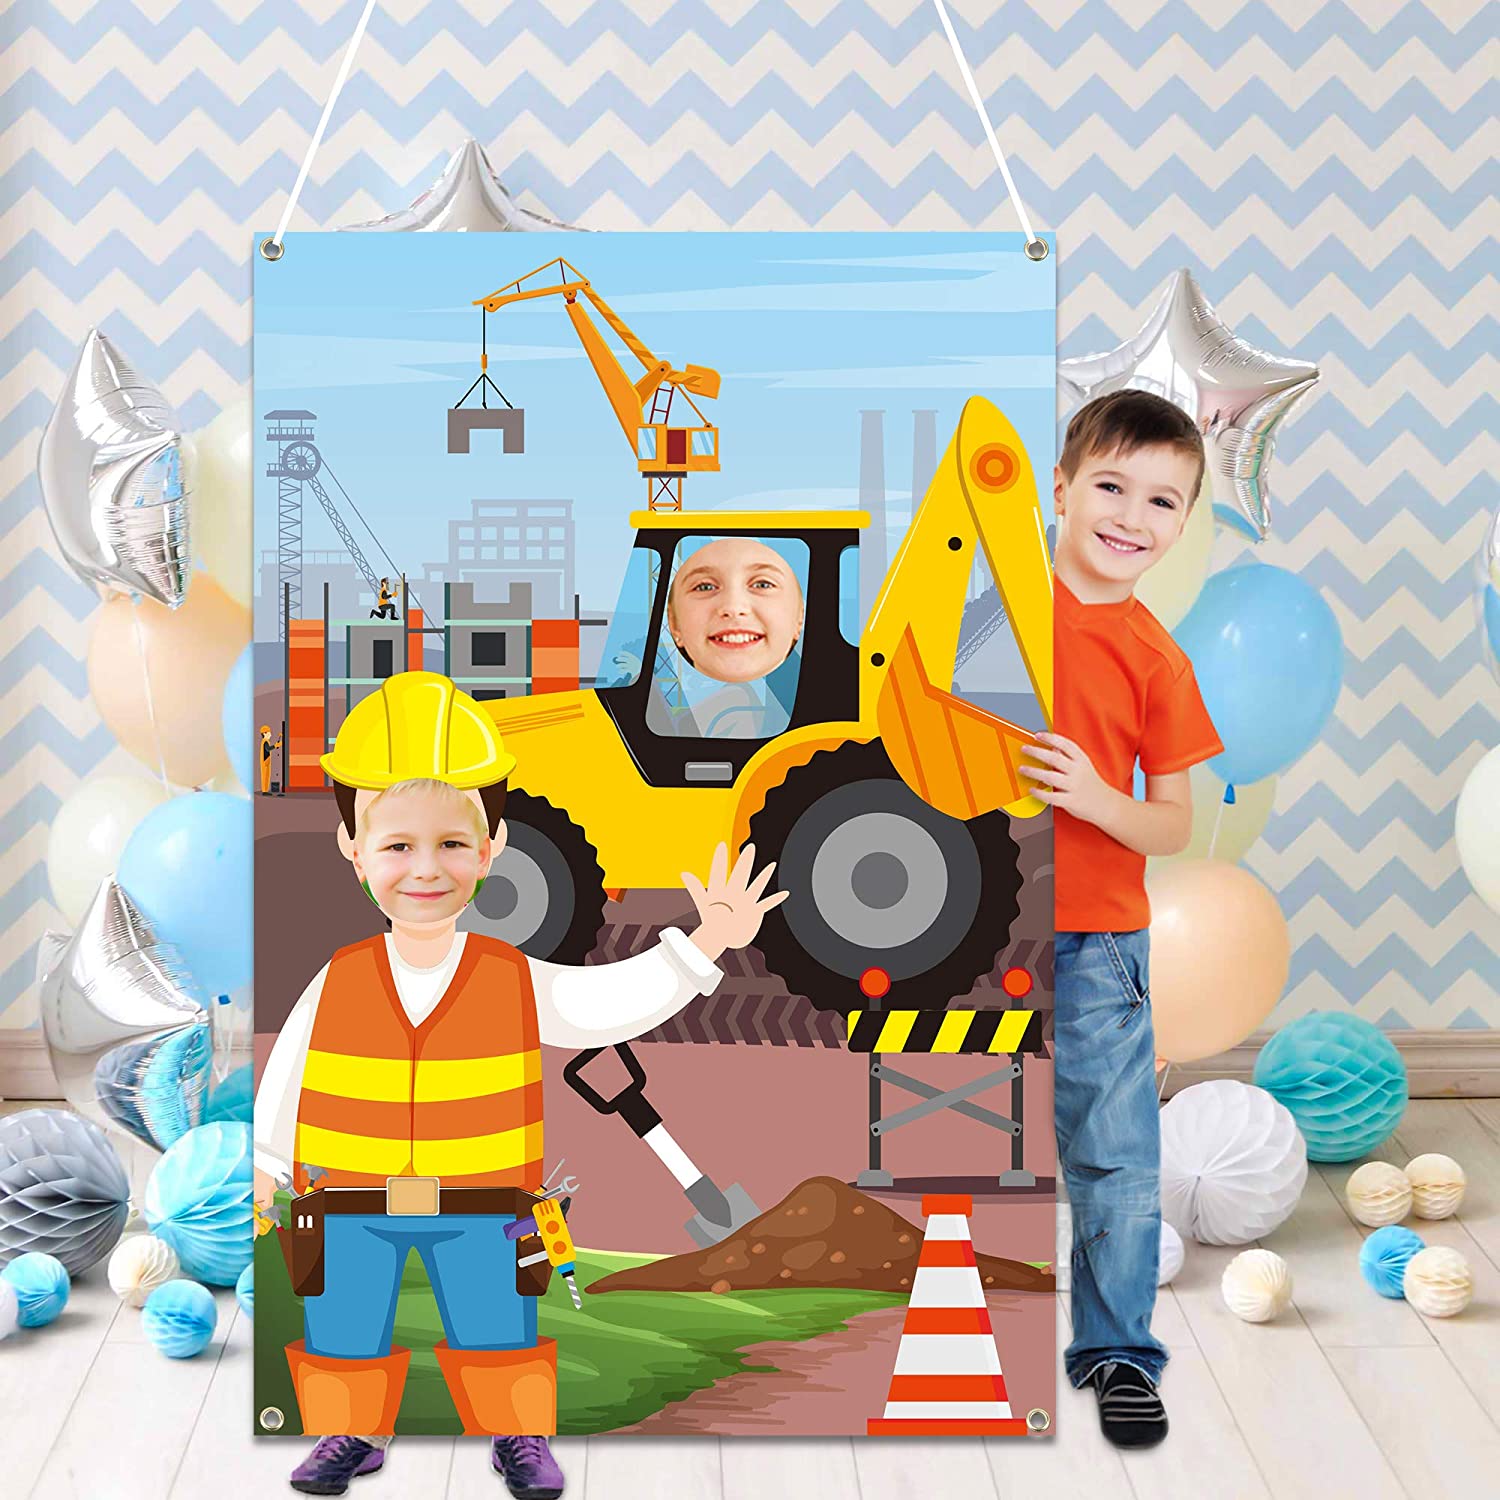 Set Up A Construction Themed Photo Booth